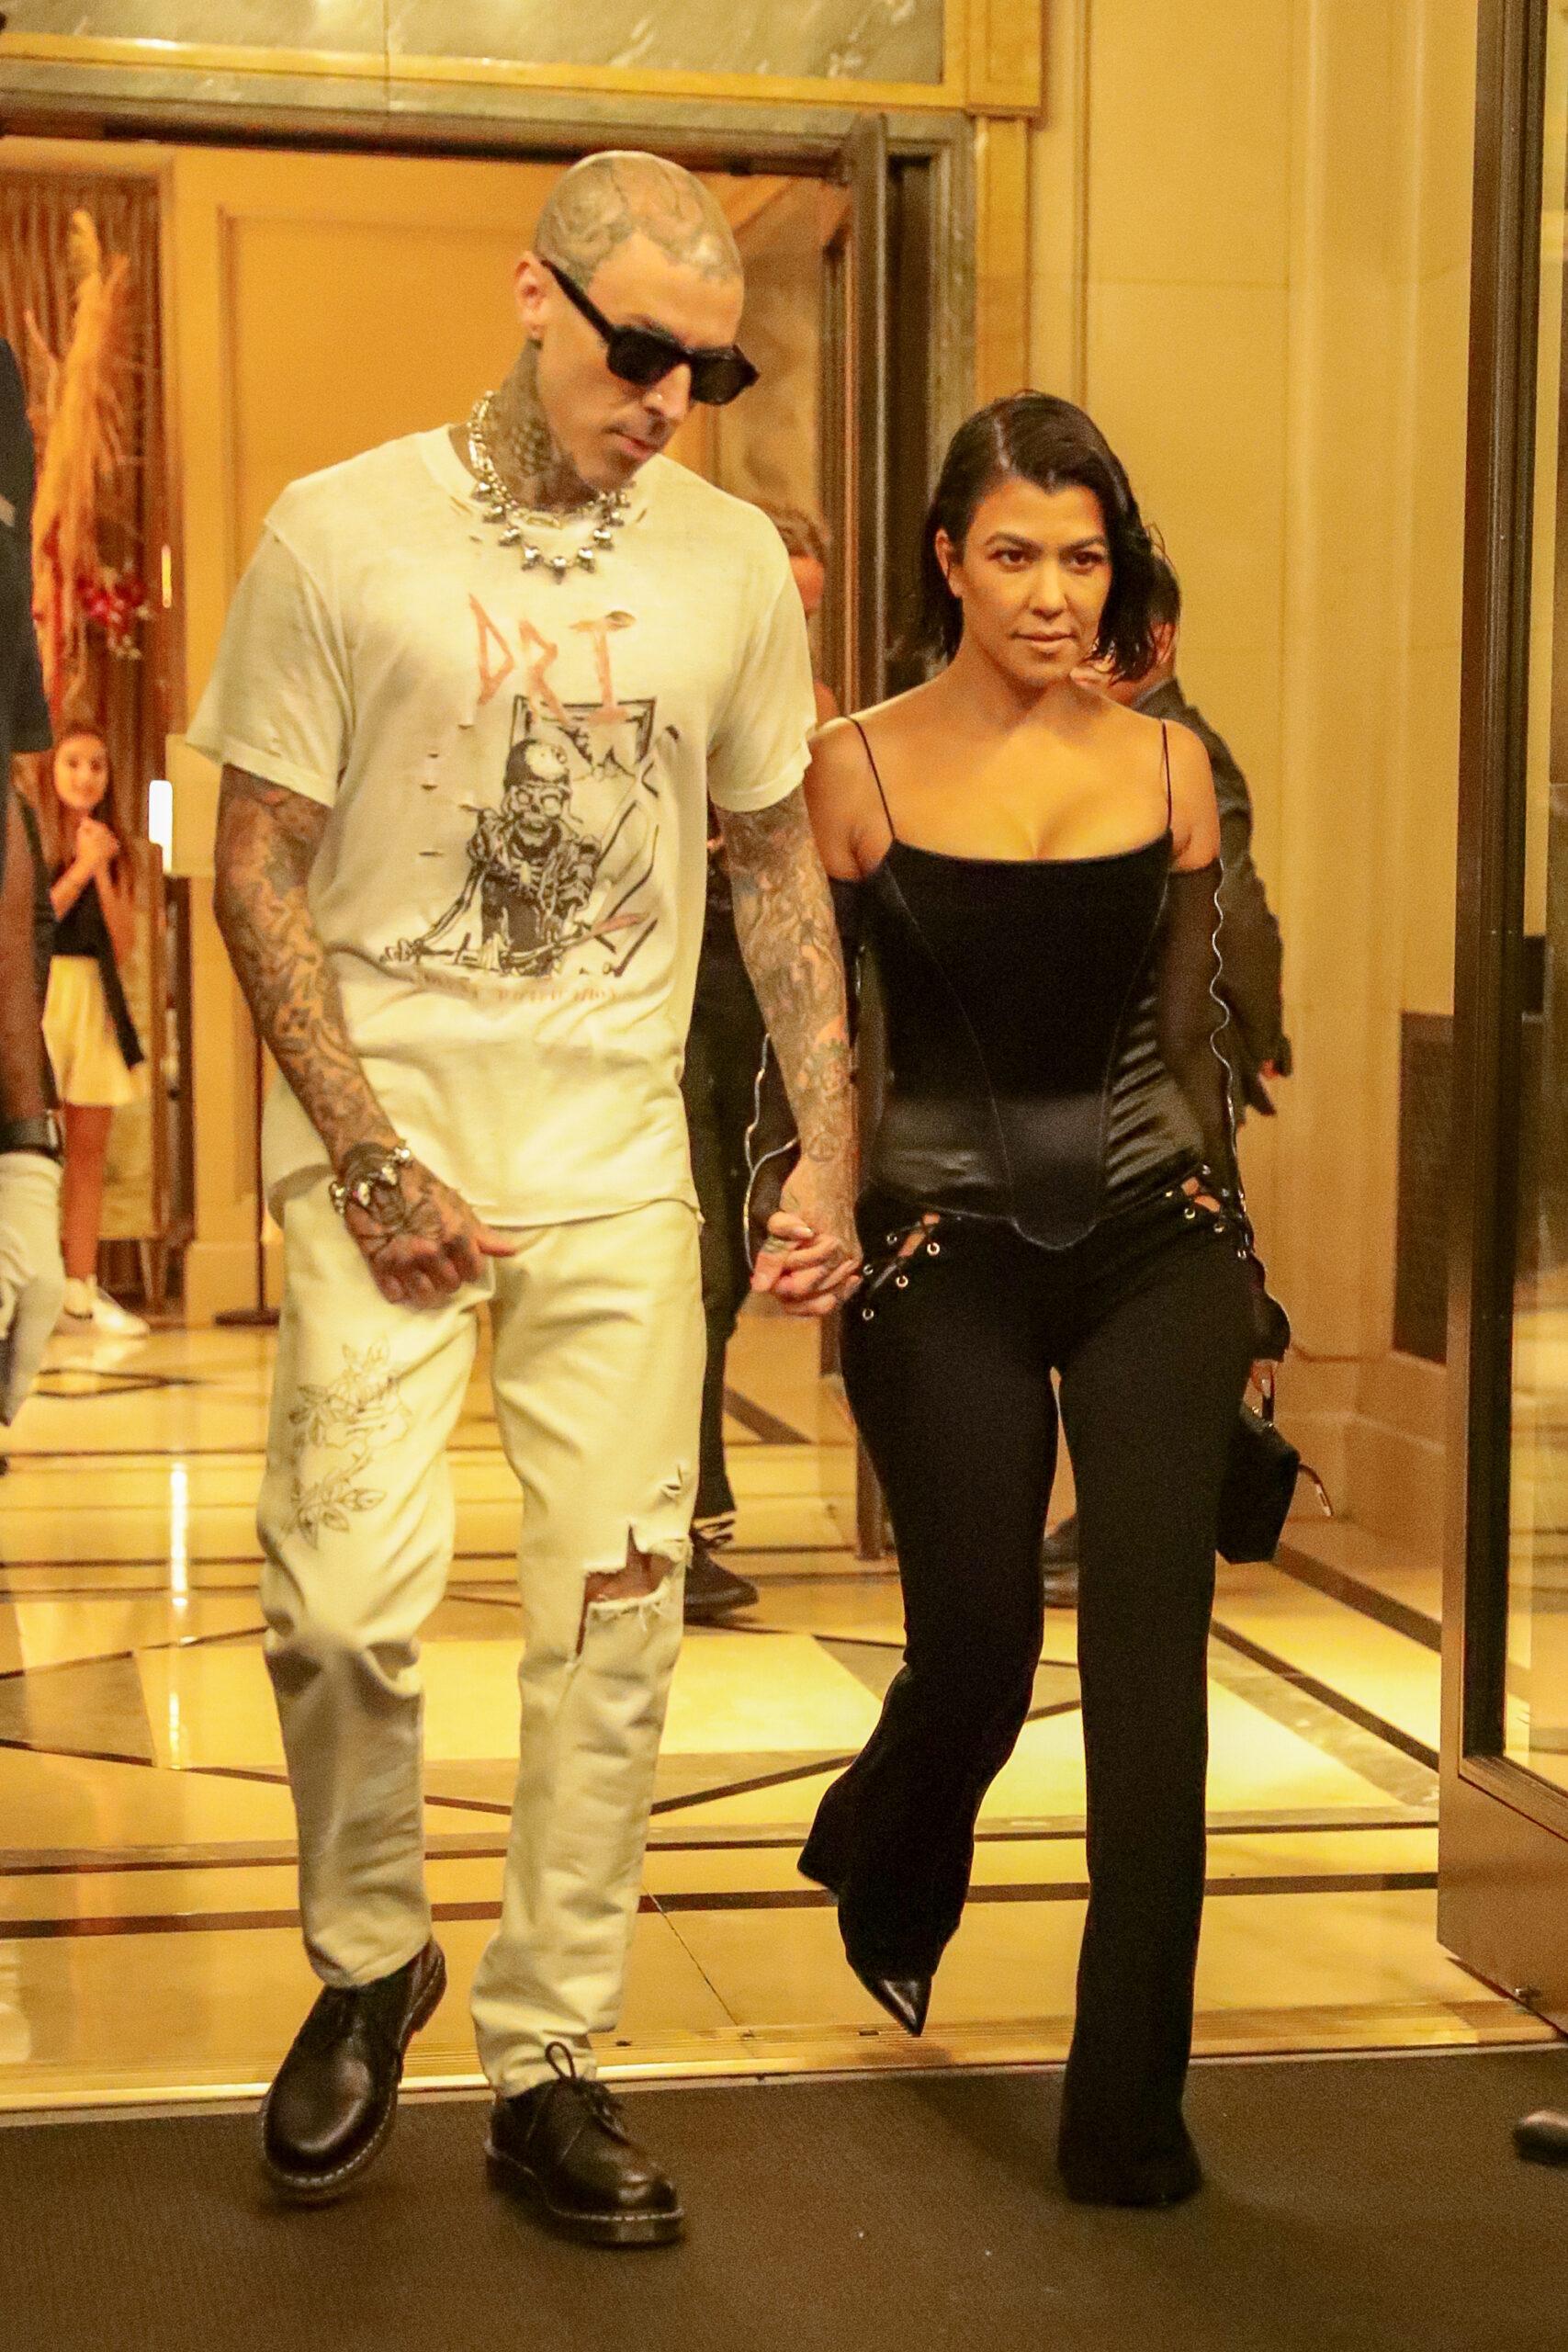 Kourtney Kardashian and Travis Barker are seen leaving the Ritz Hotel in NYC on Sep 11 2021